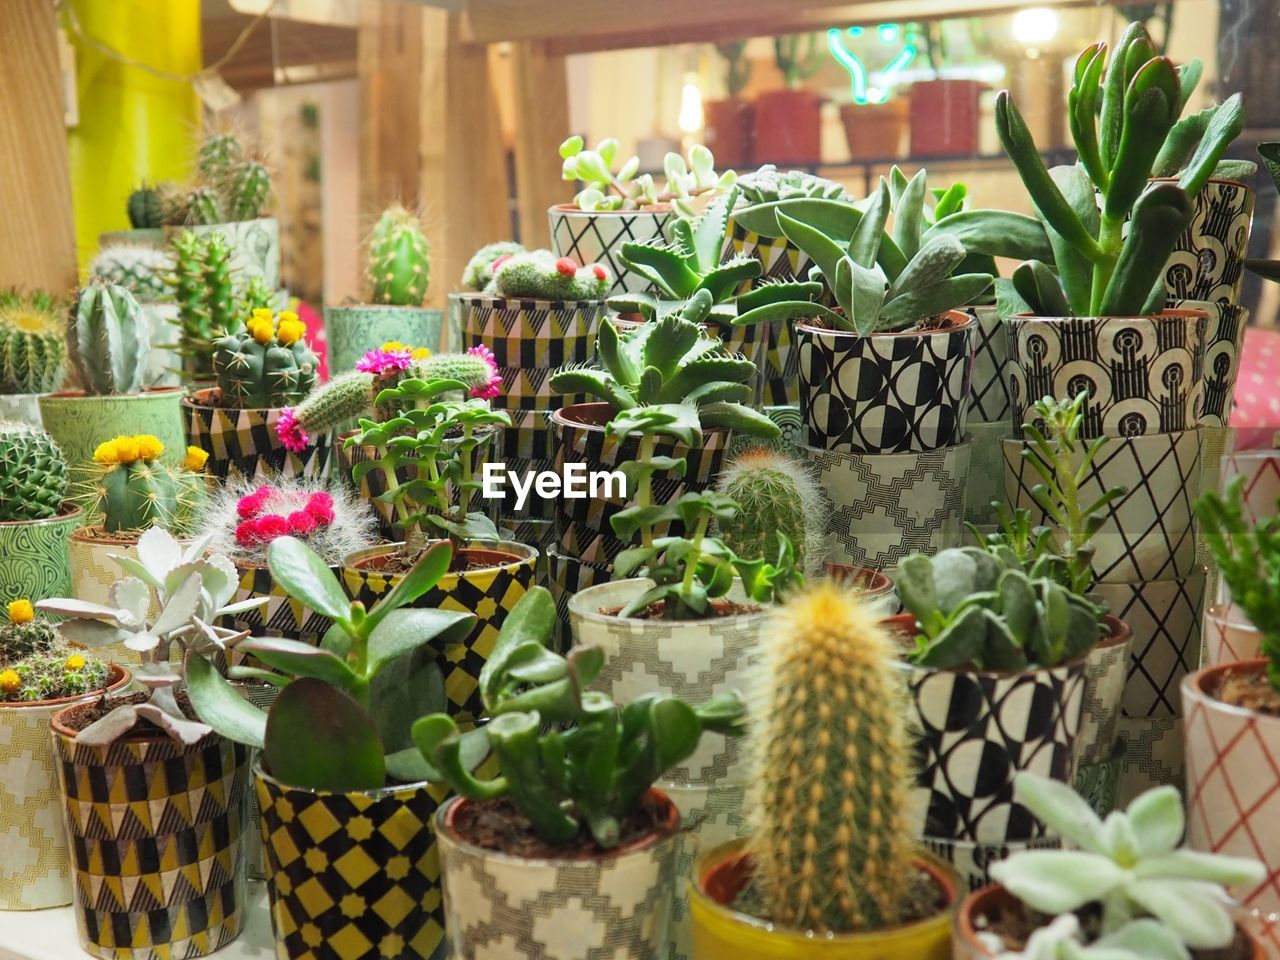 POTTED PLANTS FOR SALE